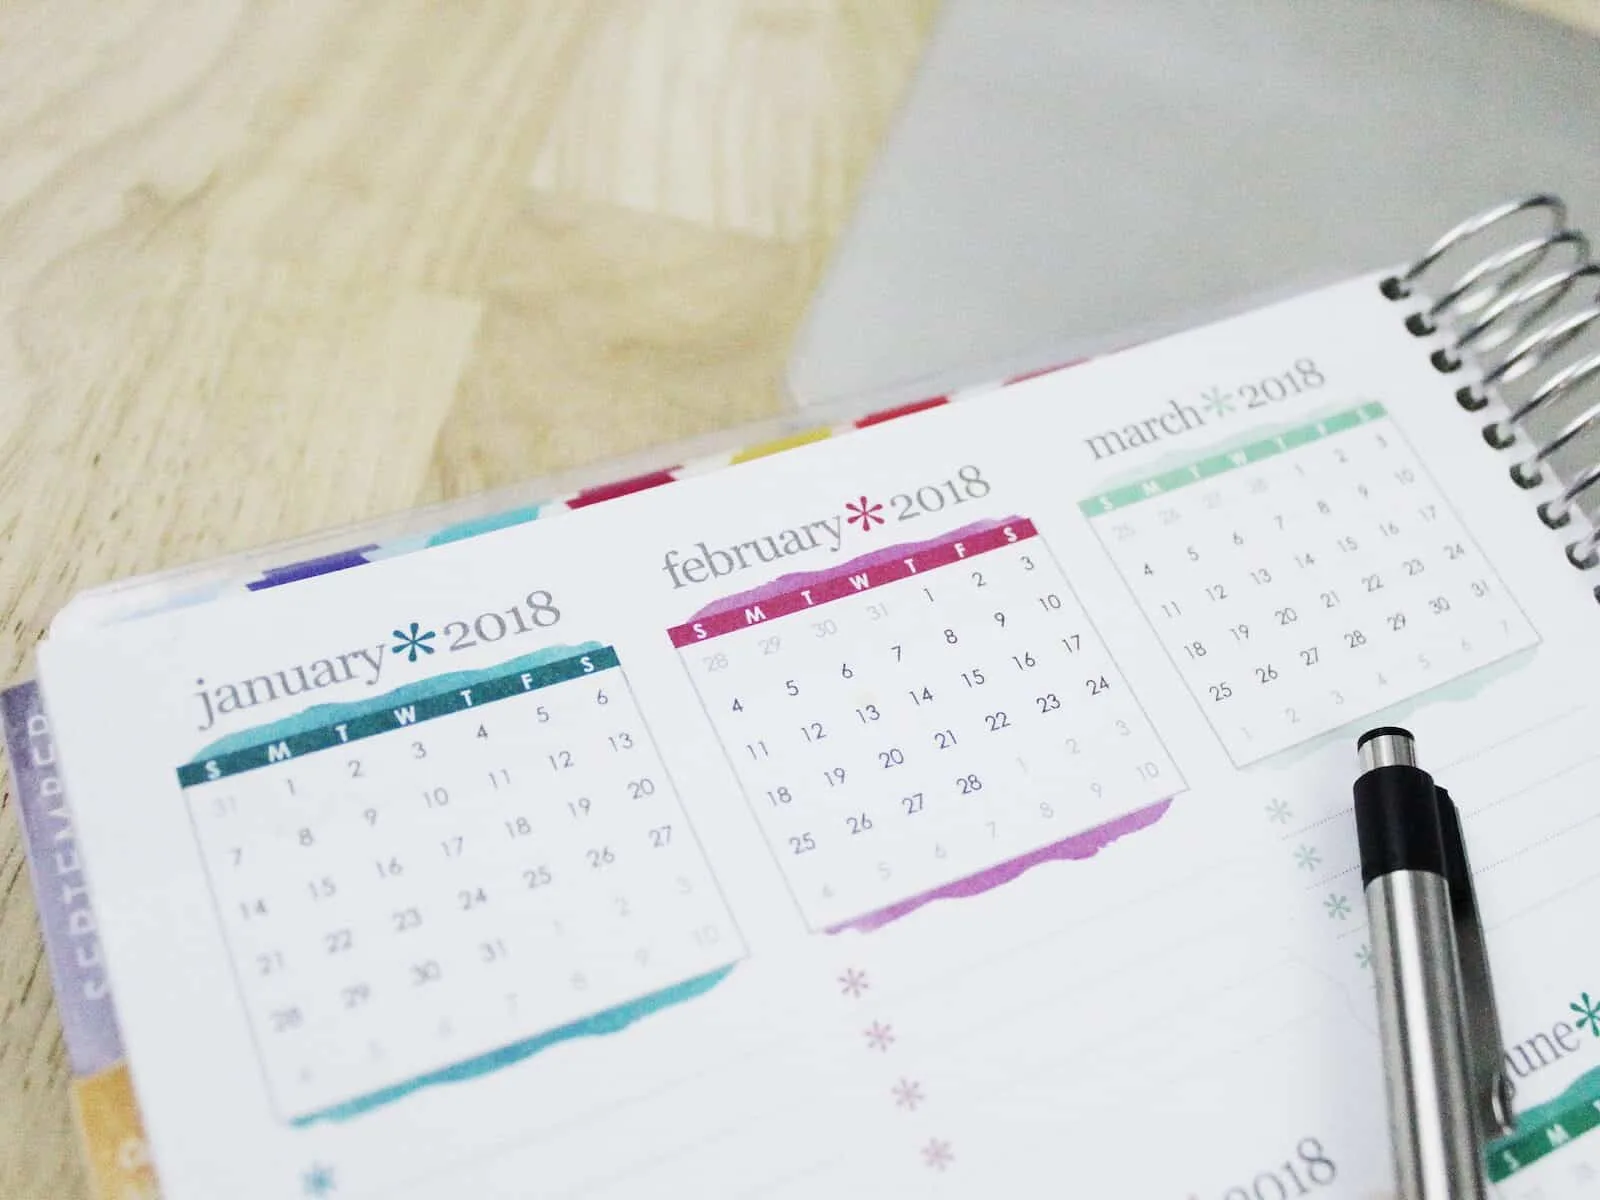 Calendar and pen on wooden table.